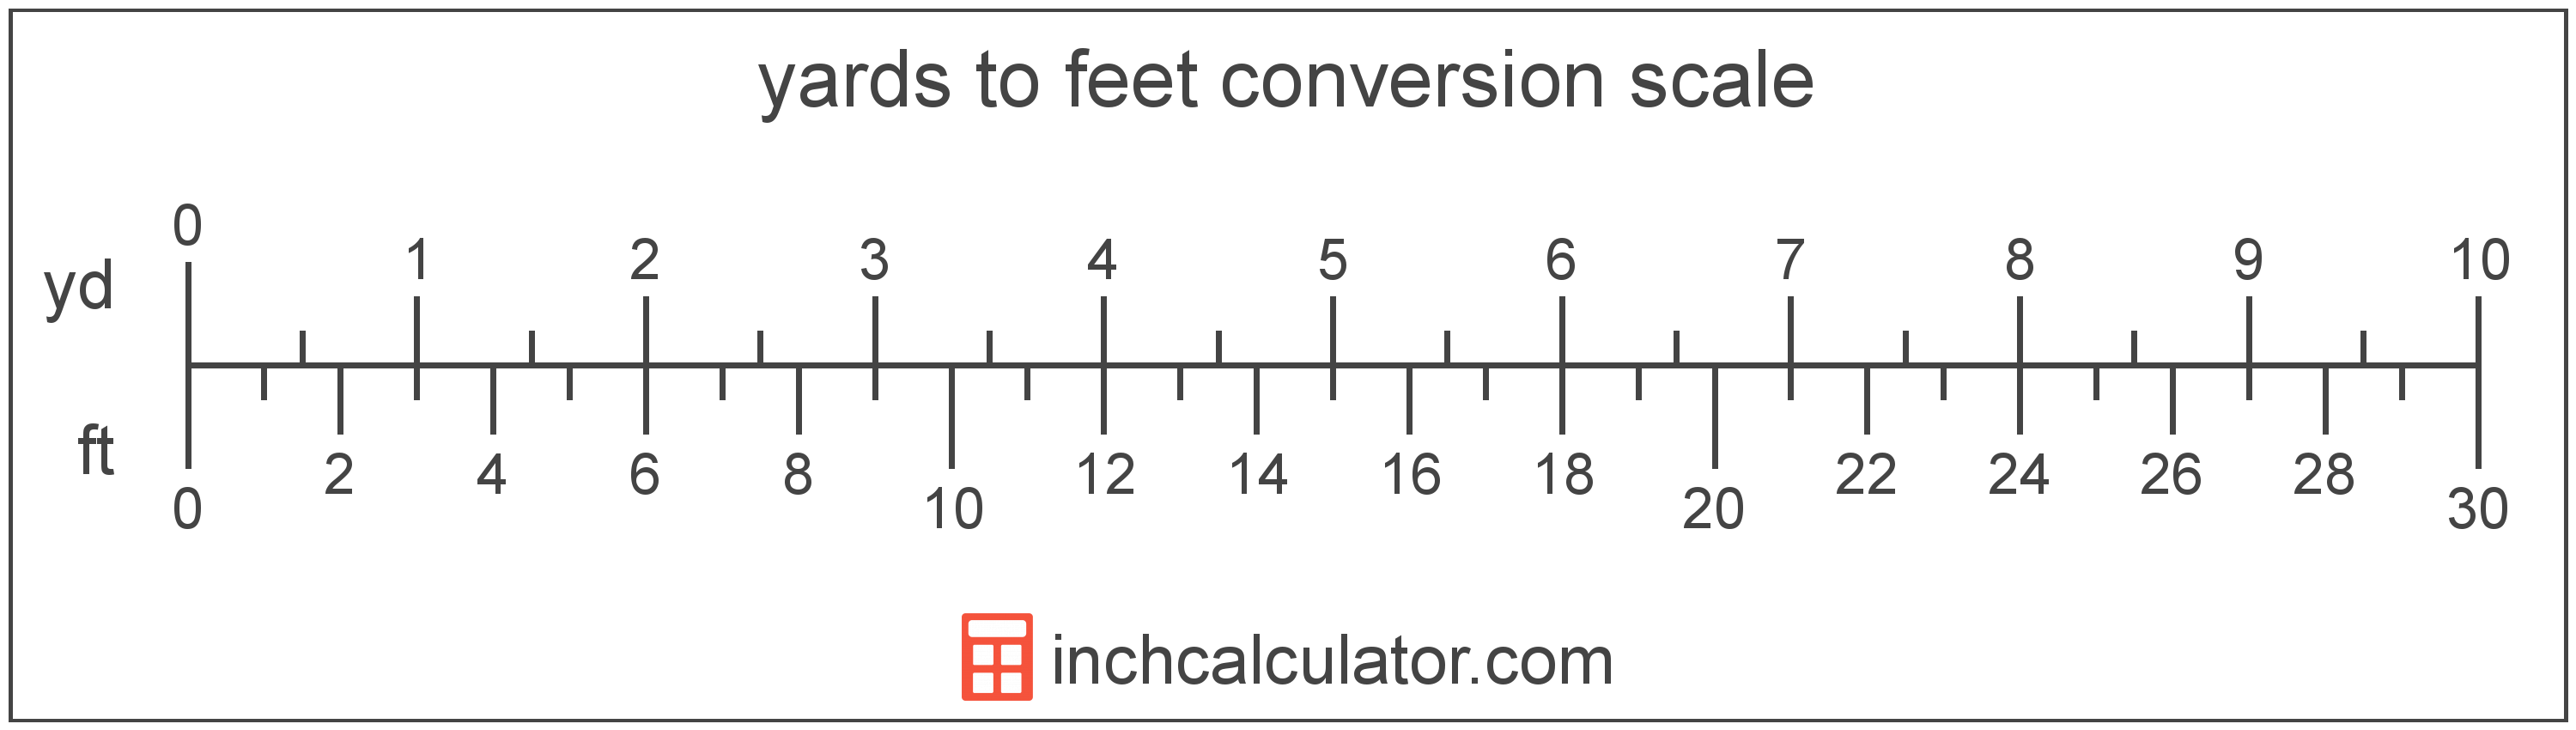 Yards to Feet Conversion (yd to ft) - Inch Calculator